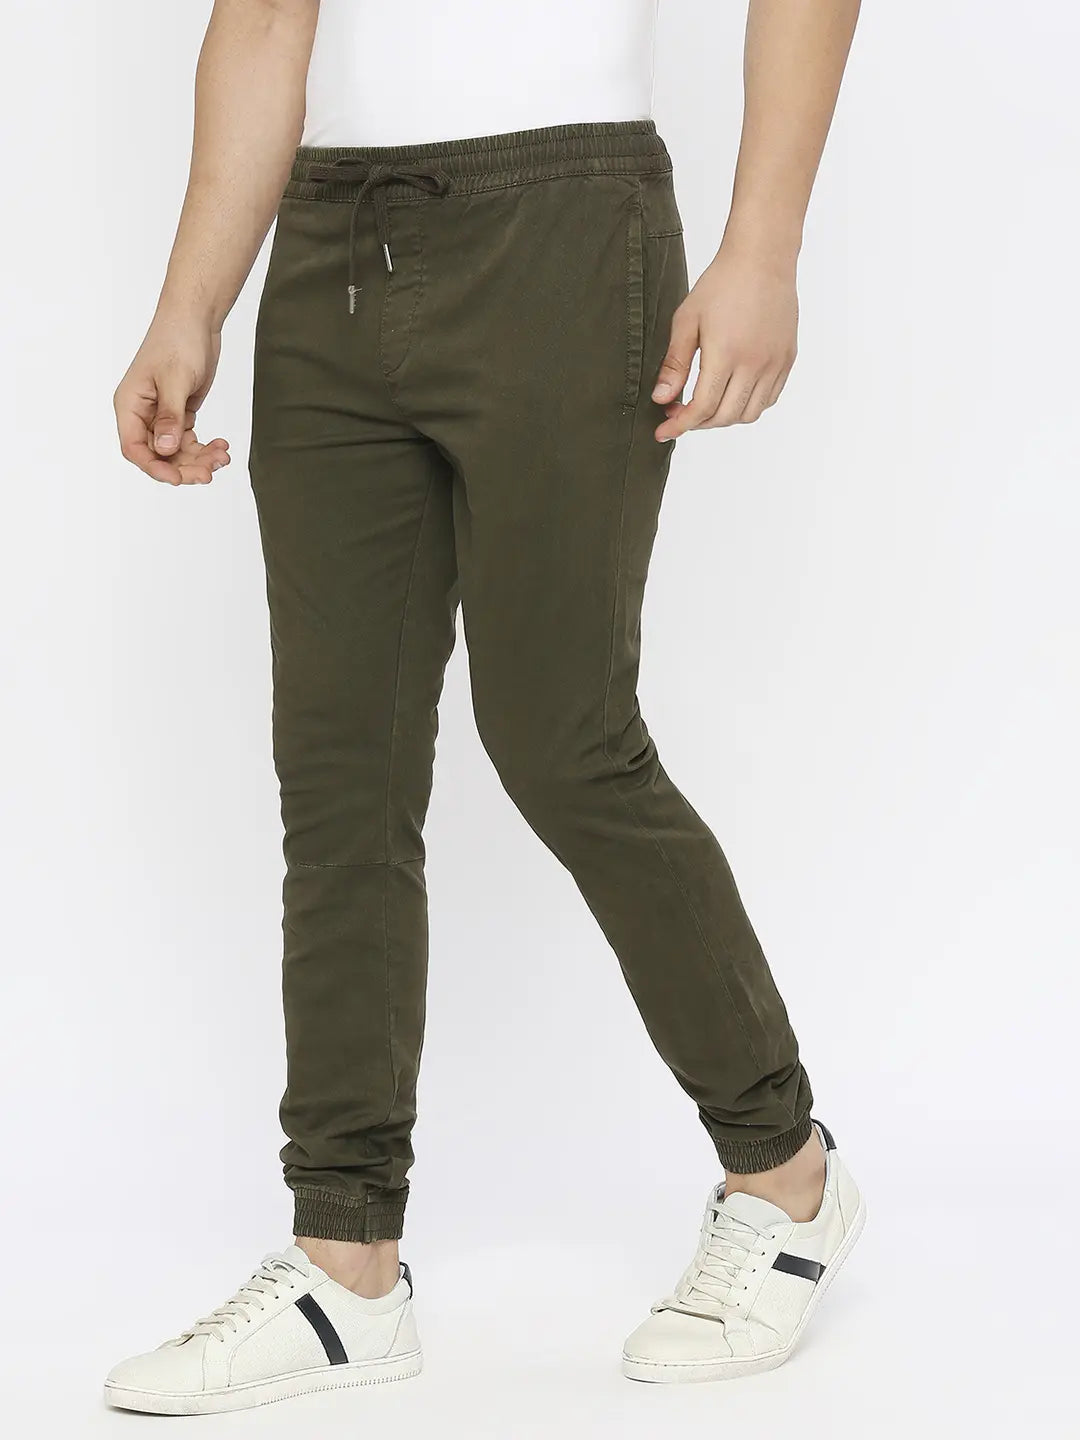 Spykar Casual Trousers  Buy Spykar Military Green Cotton Slim Fit Regular  Length Trousers For Men Online  Nykaa Fashion